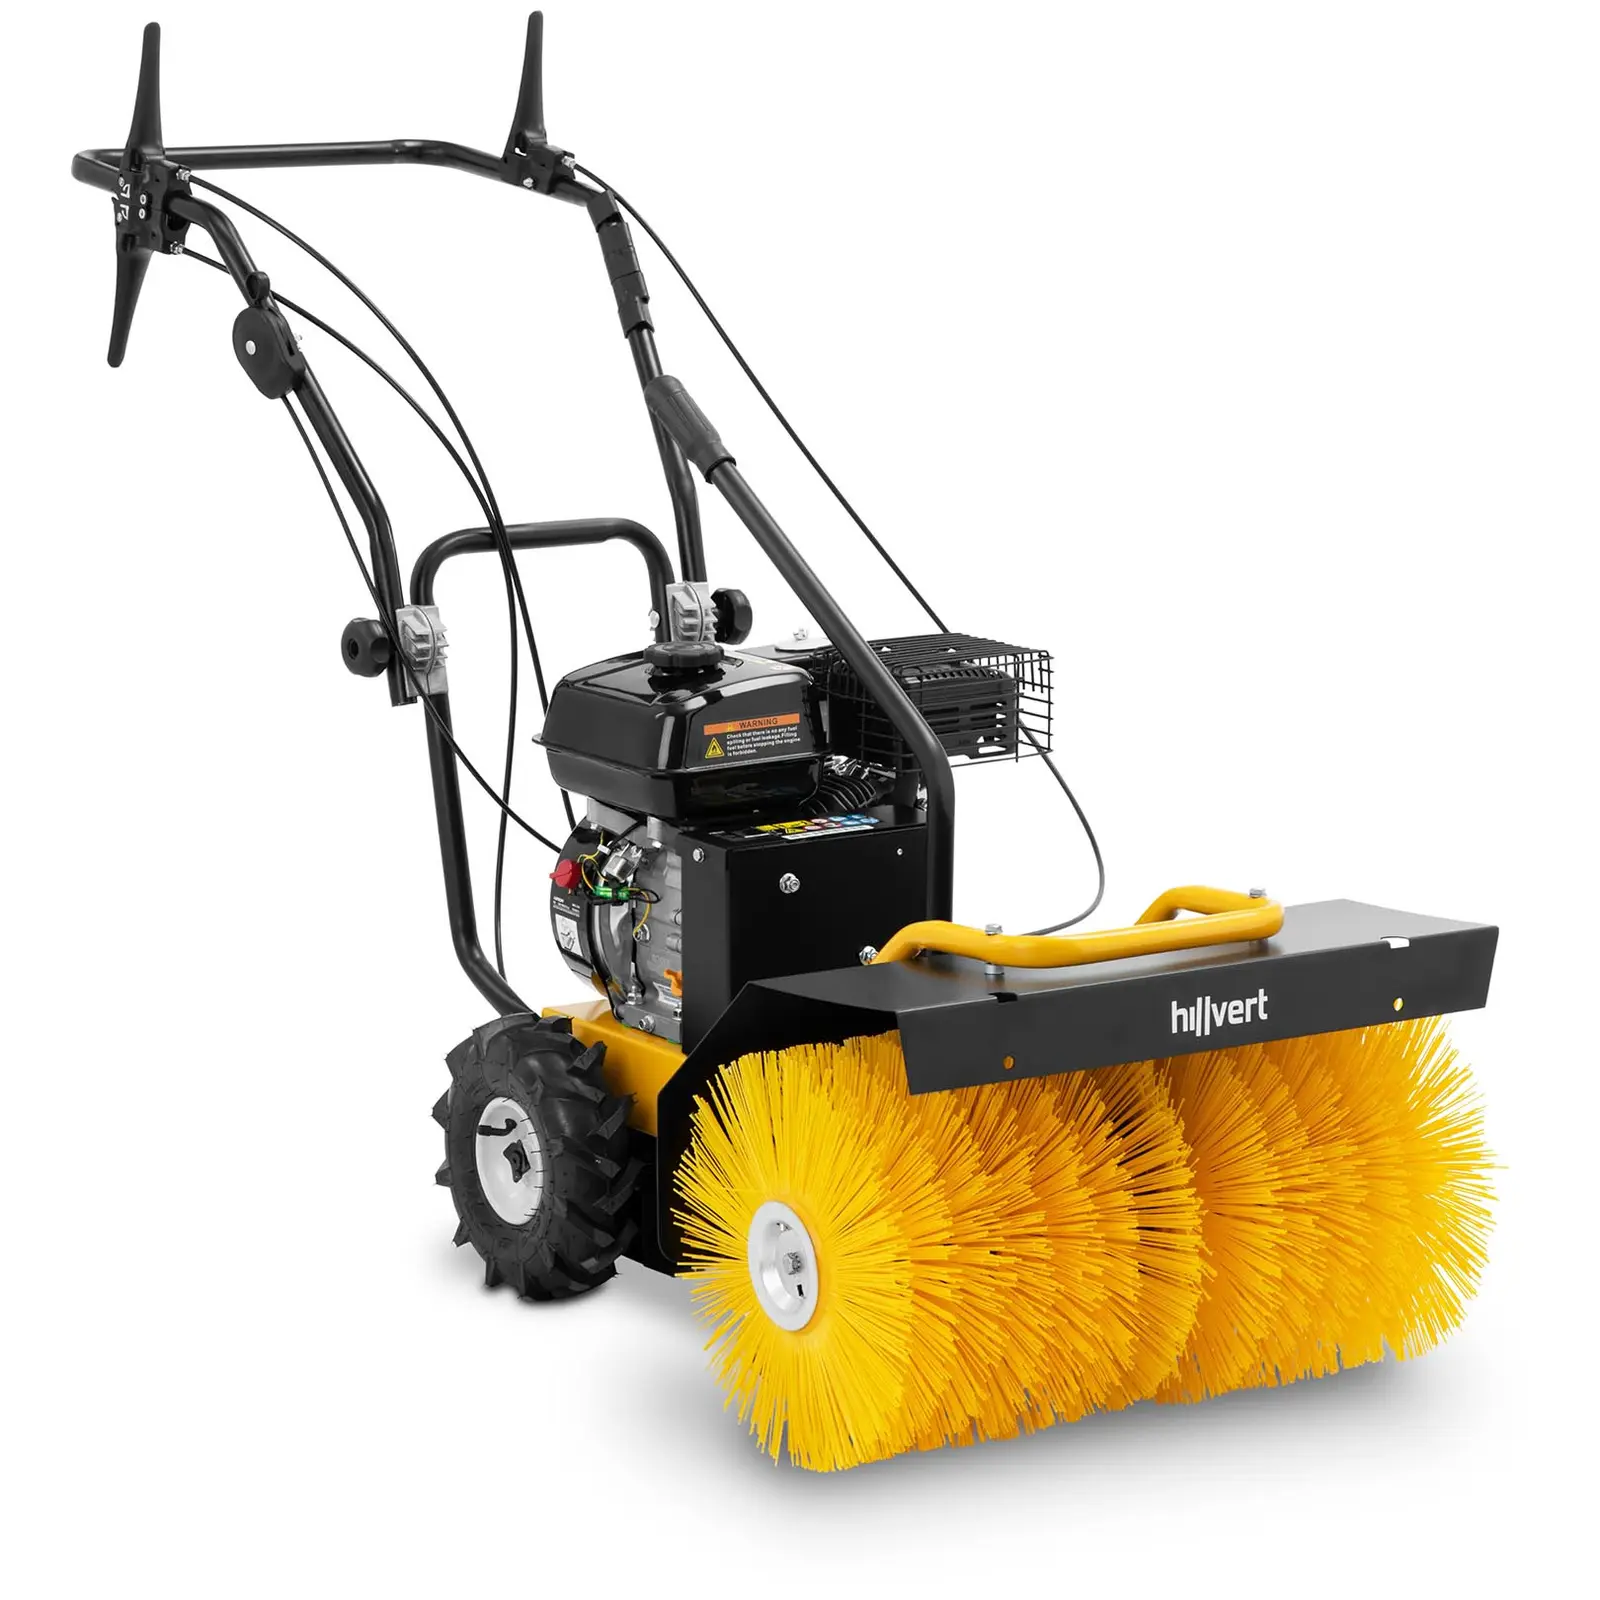 Factory second Lawn Sweeper - 208cc, 4.1kW - 700 mm working width